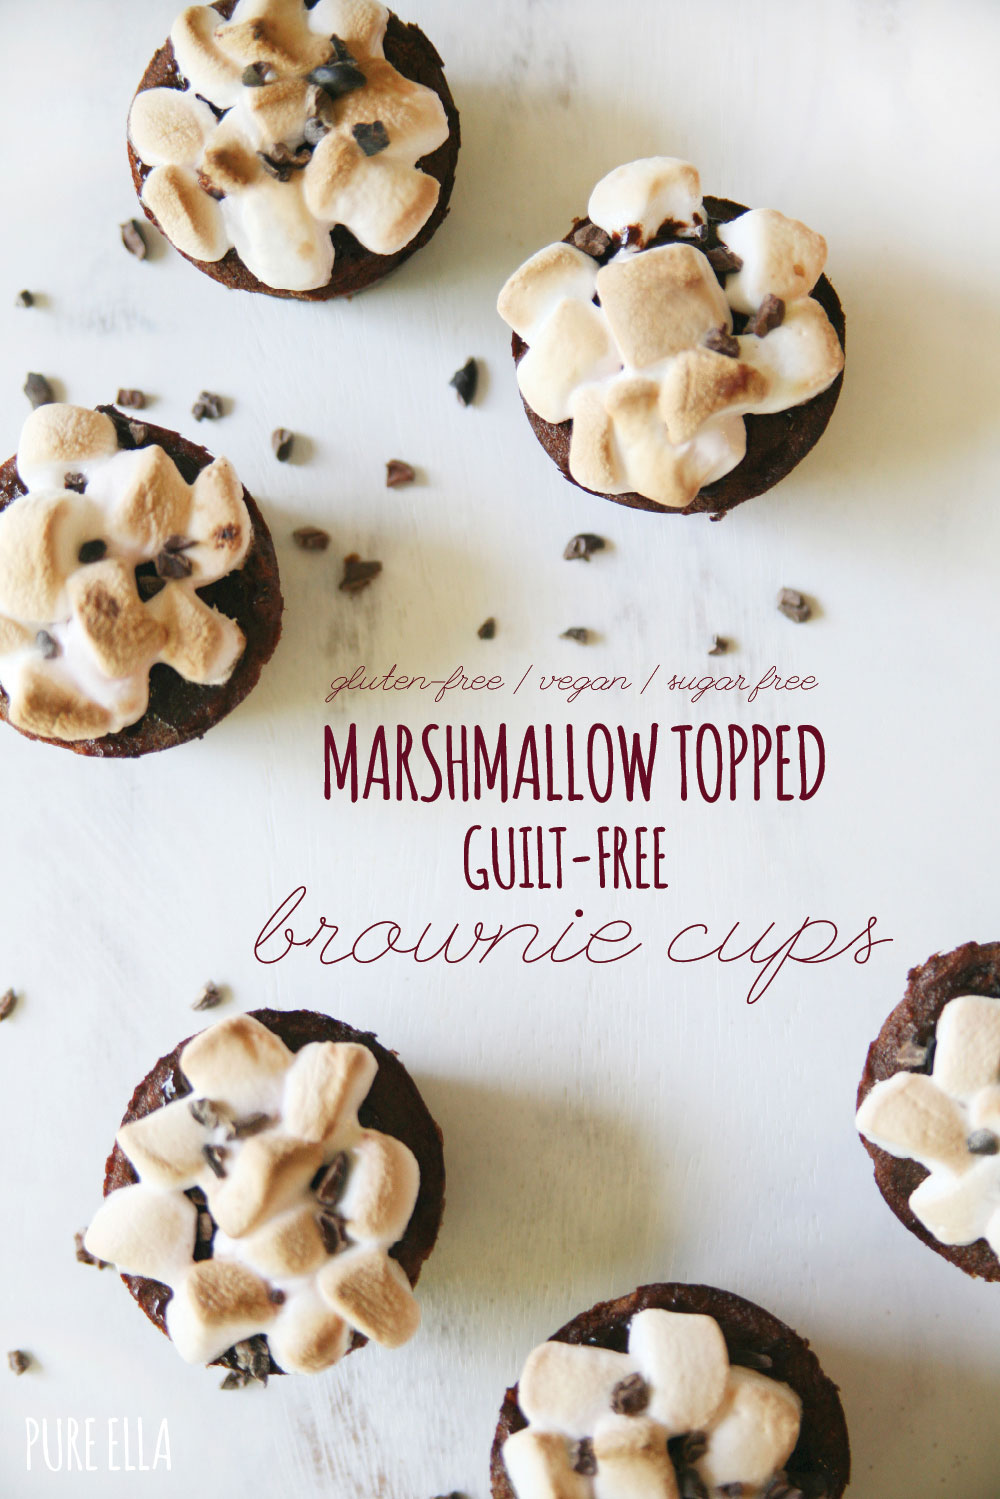 Pure-Ella-Marshmallow-Topped-Gluten-free-Vegan-Brownie-Cups